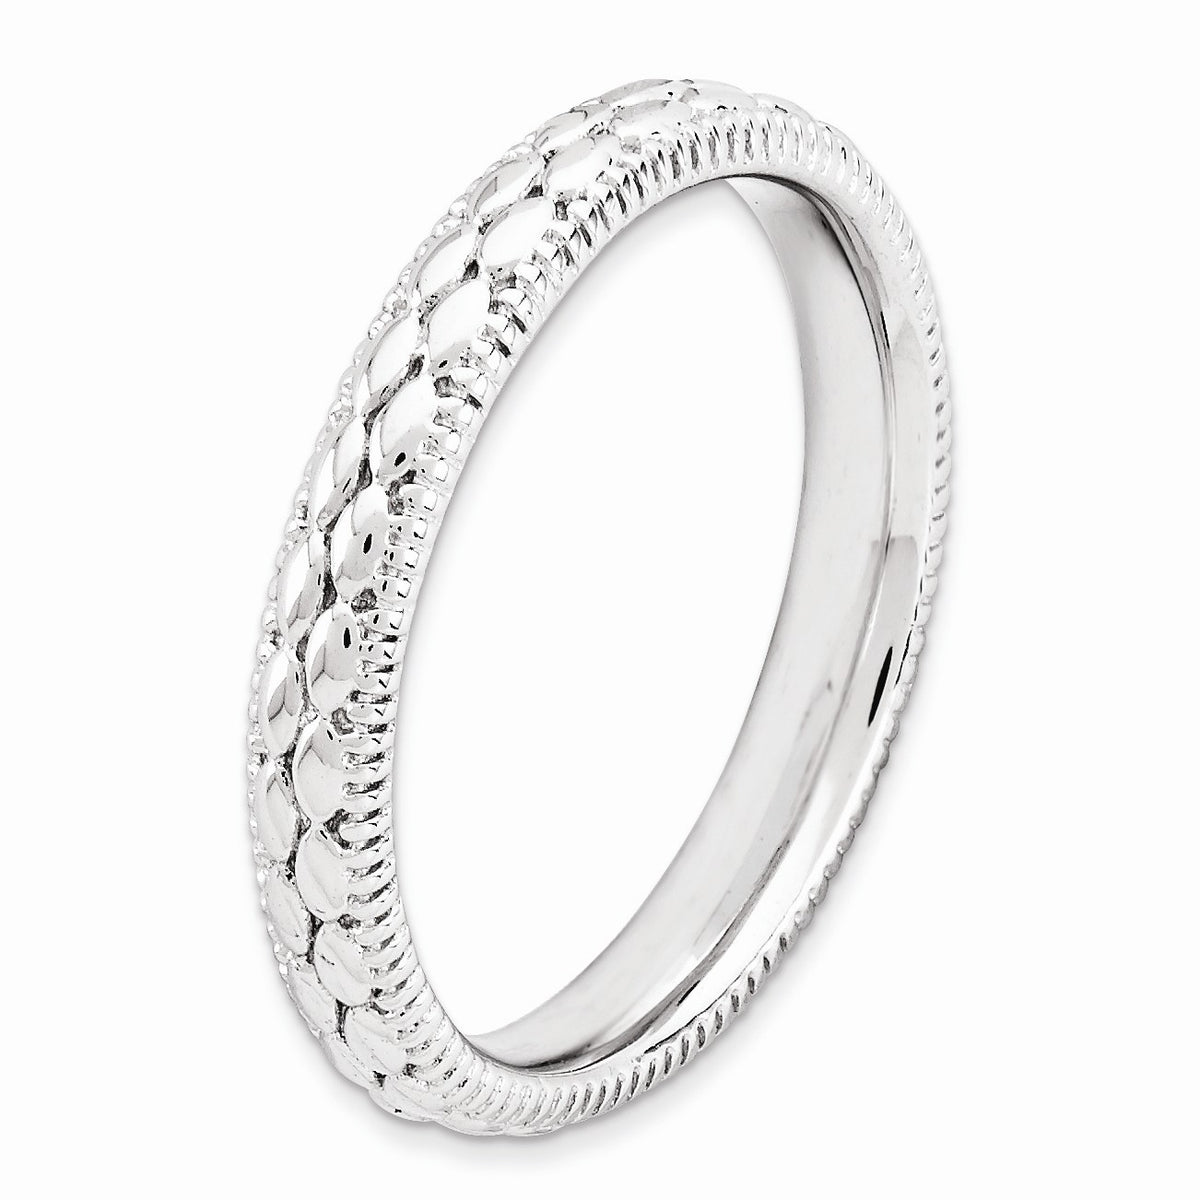 Alternate view of the 3.5mm Rhodium Plated Sterling Silver Stackable Patterned Band by The Black Bow Jewelry Co.